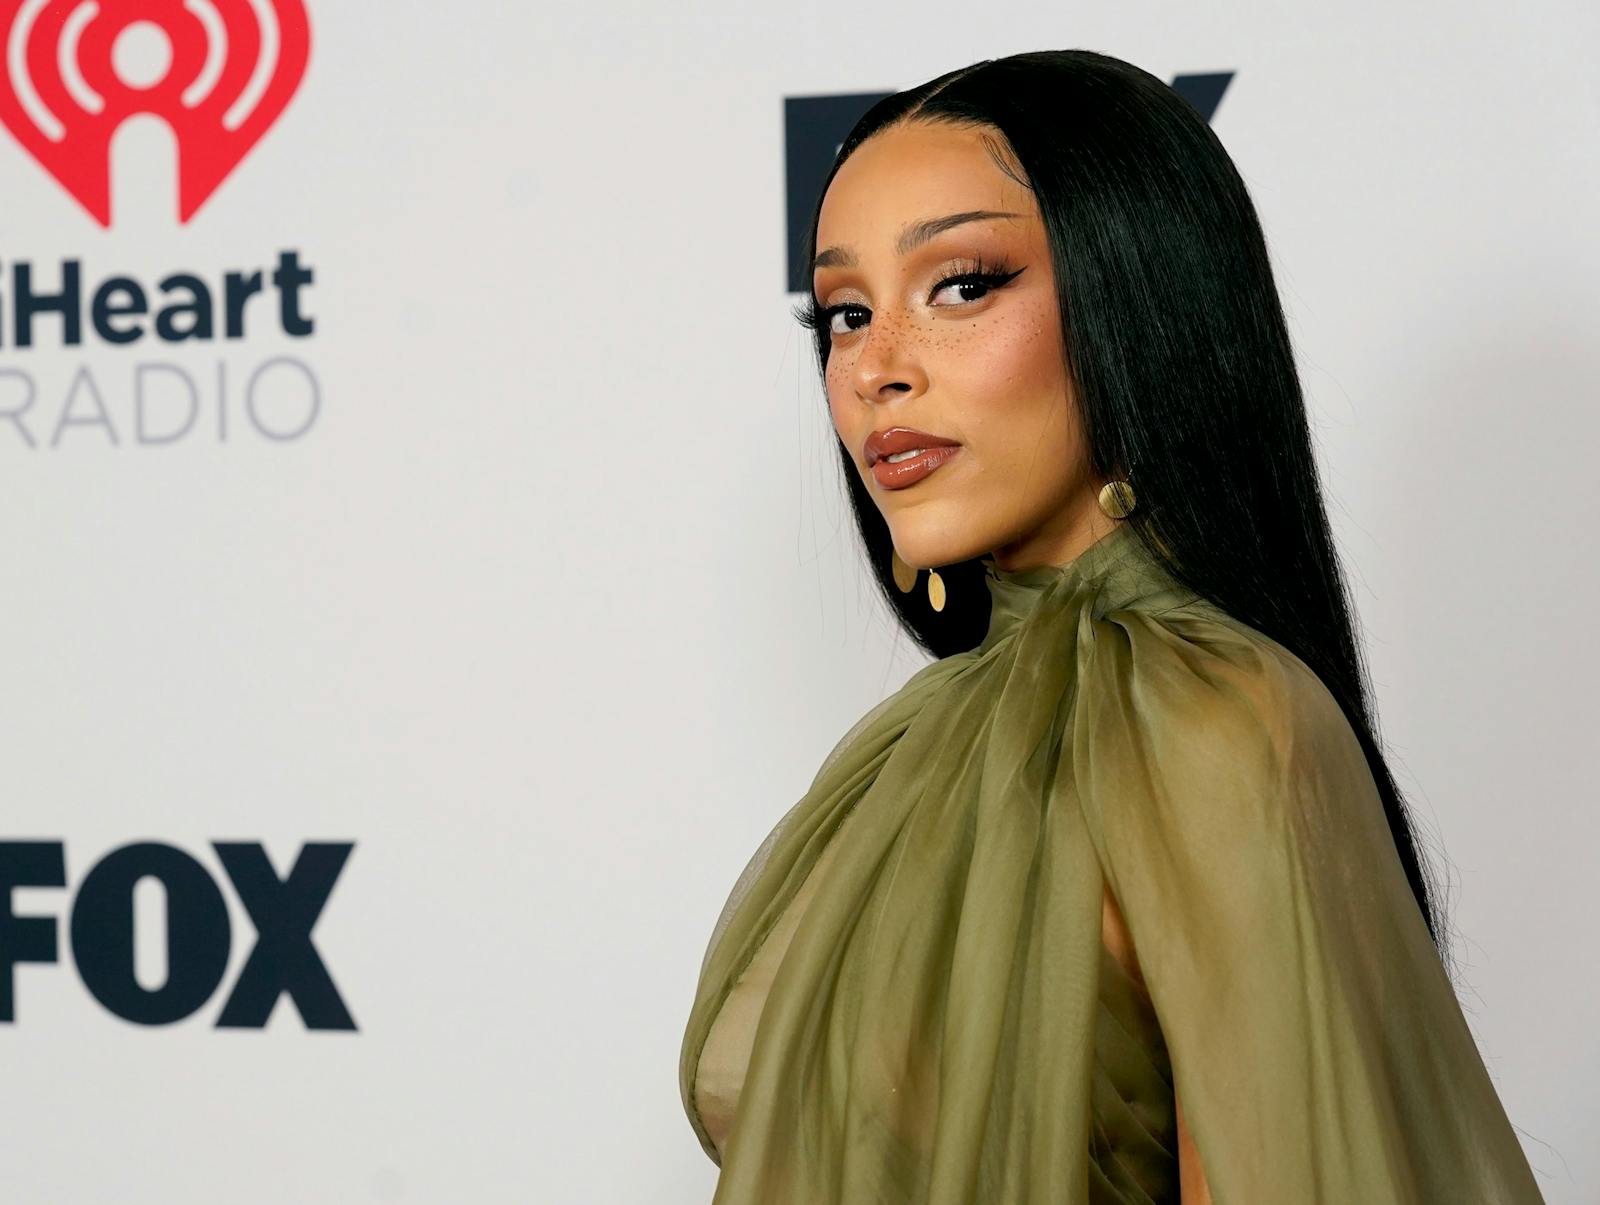 Doja Cat attends the iHeartRadio Music Awards on May 27, 2021, in Los Angeles. Photo: AP